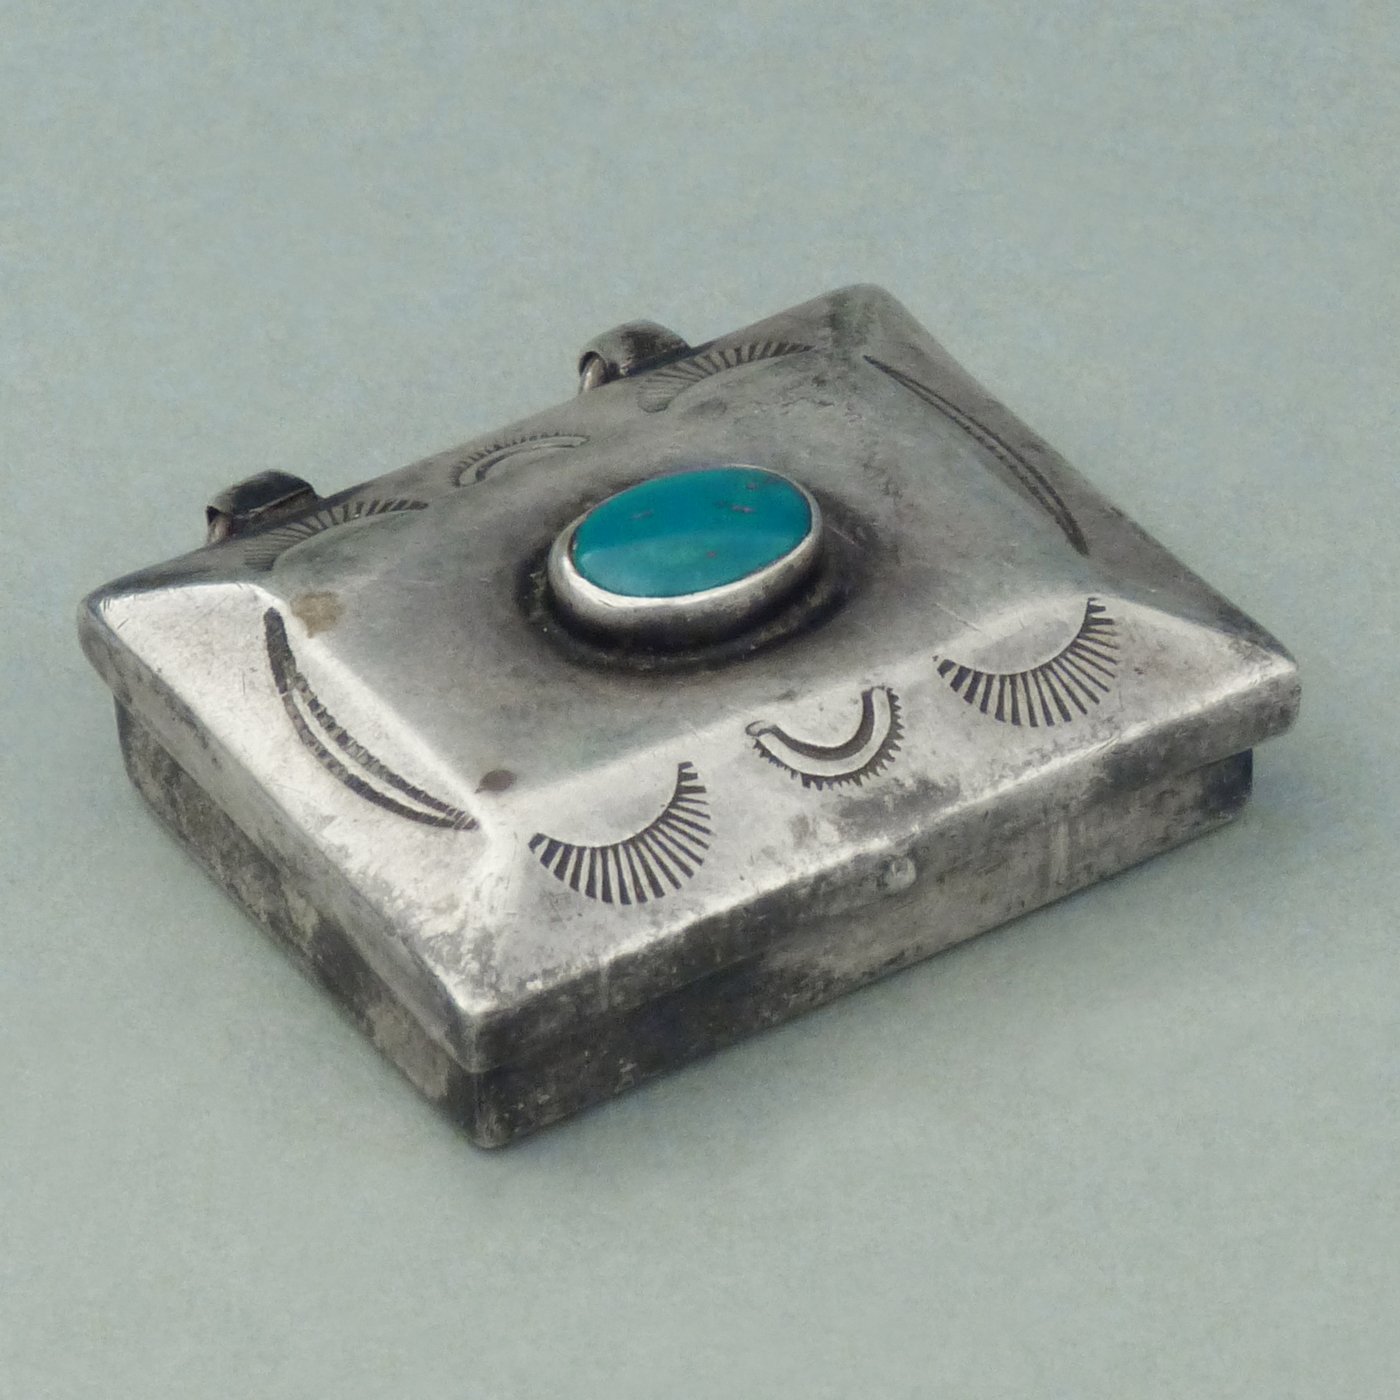 1930s HAND STAMPED SILVER PILLBOX – Tennessee Turquoise Company